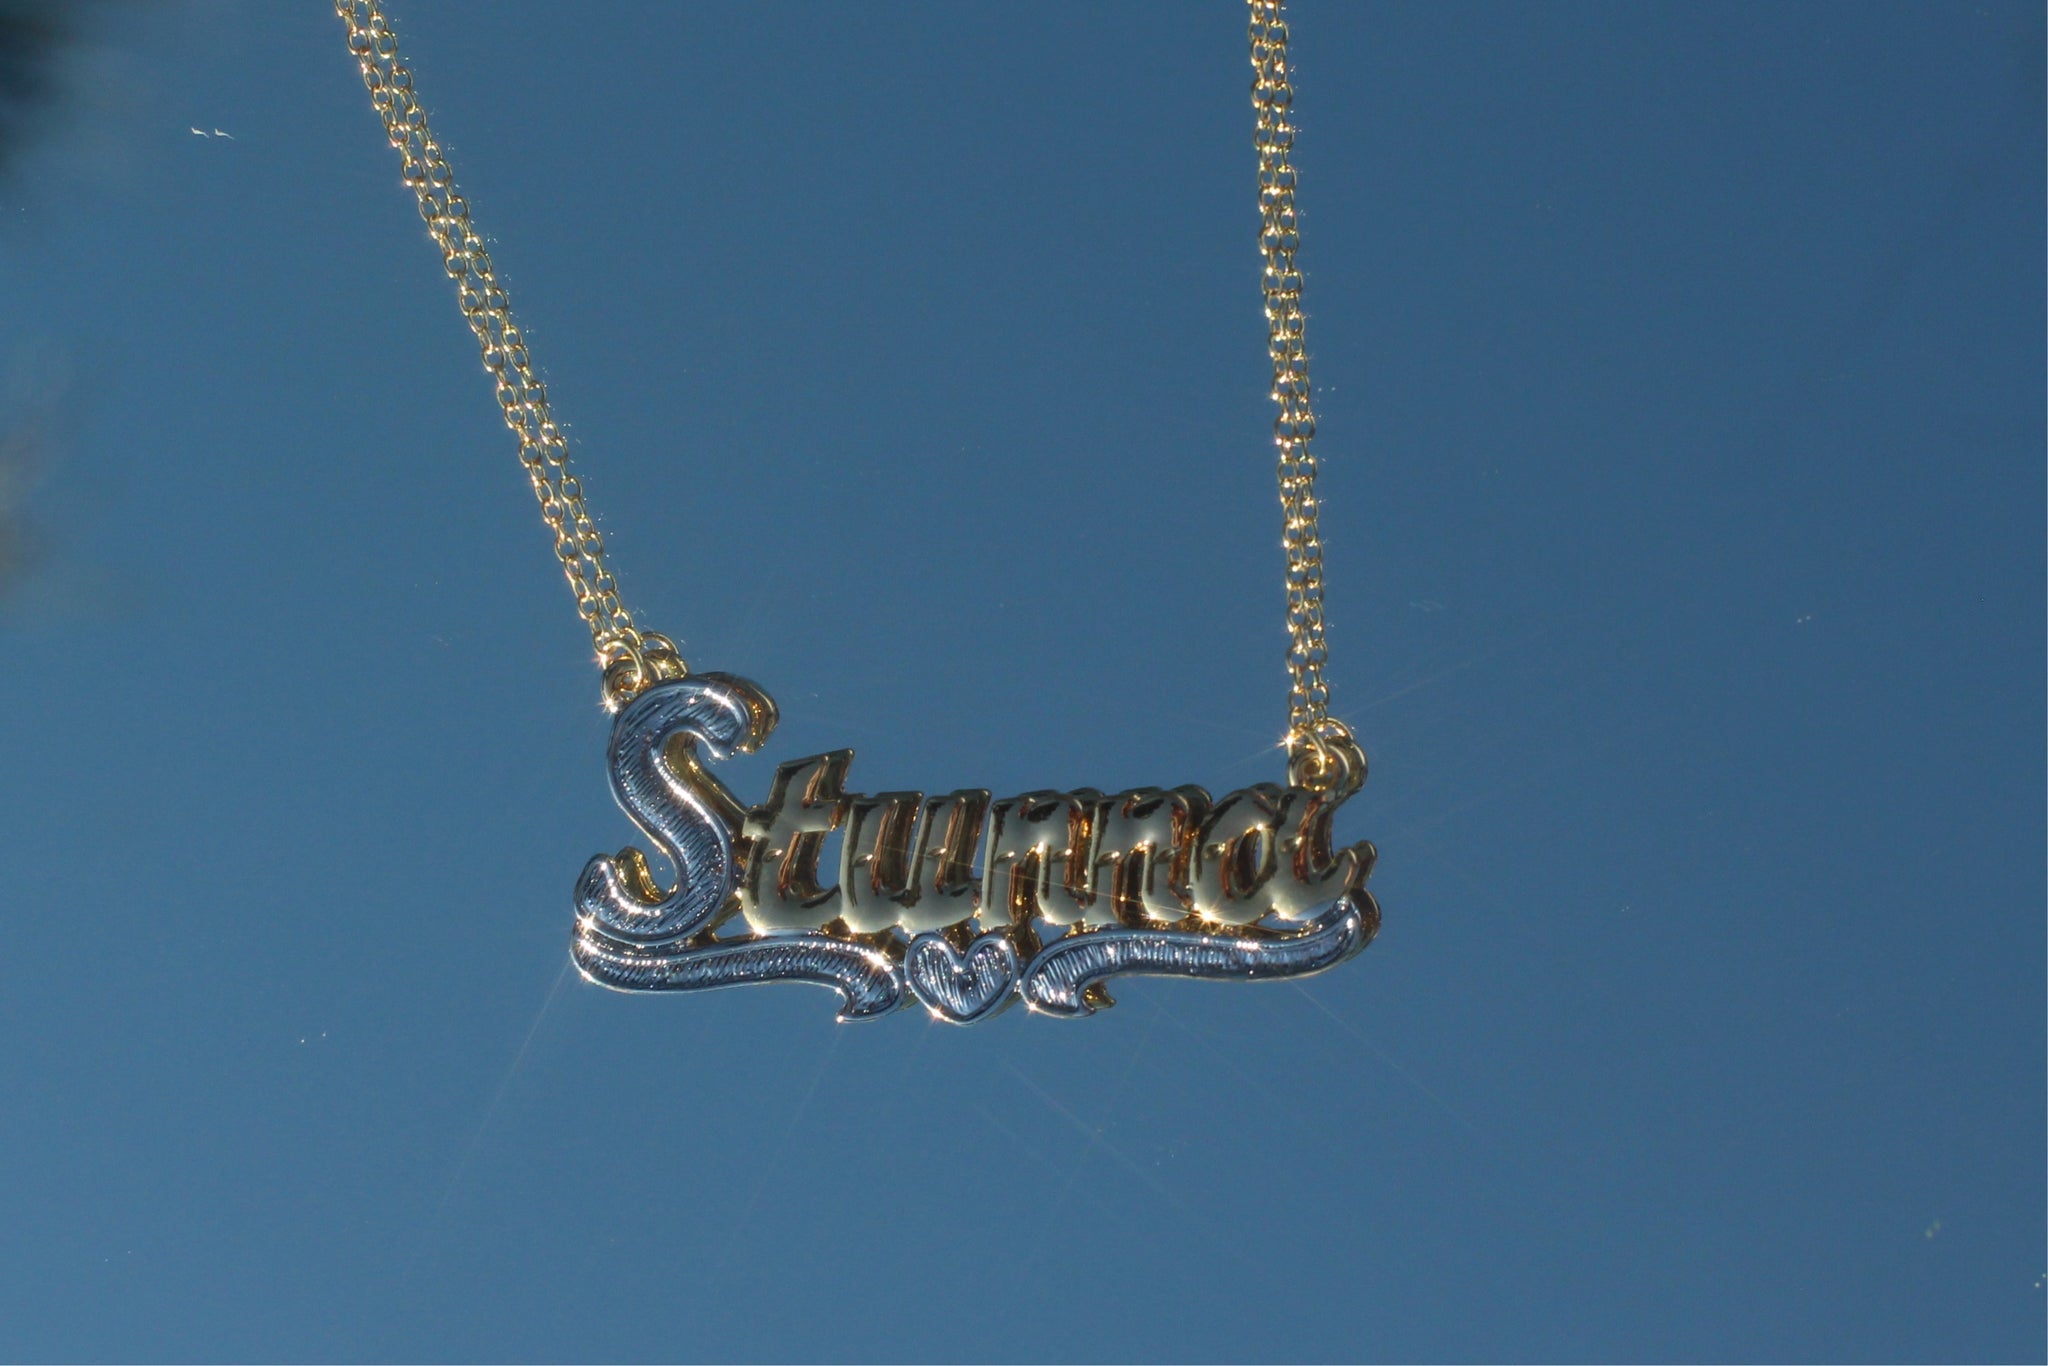 OLD SCHOOL NAME NECKLACE - Bling Ting